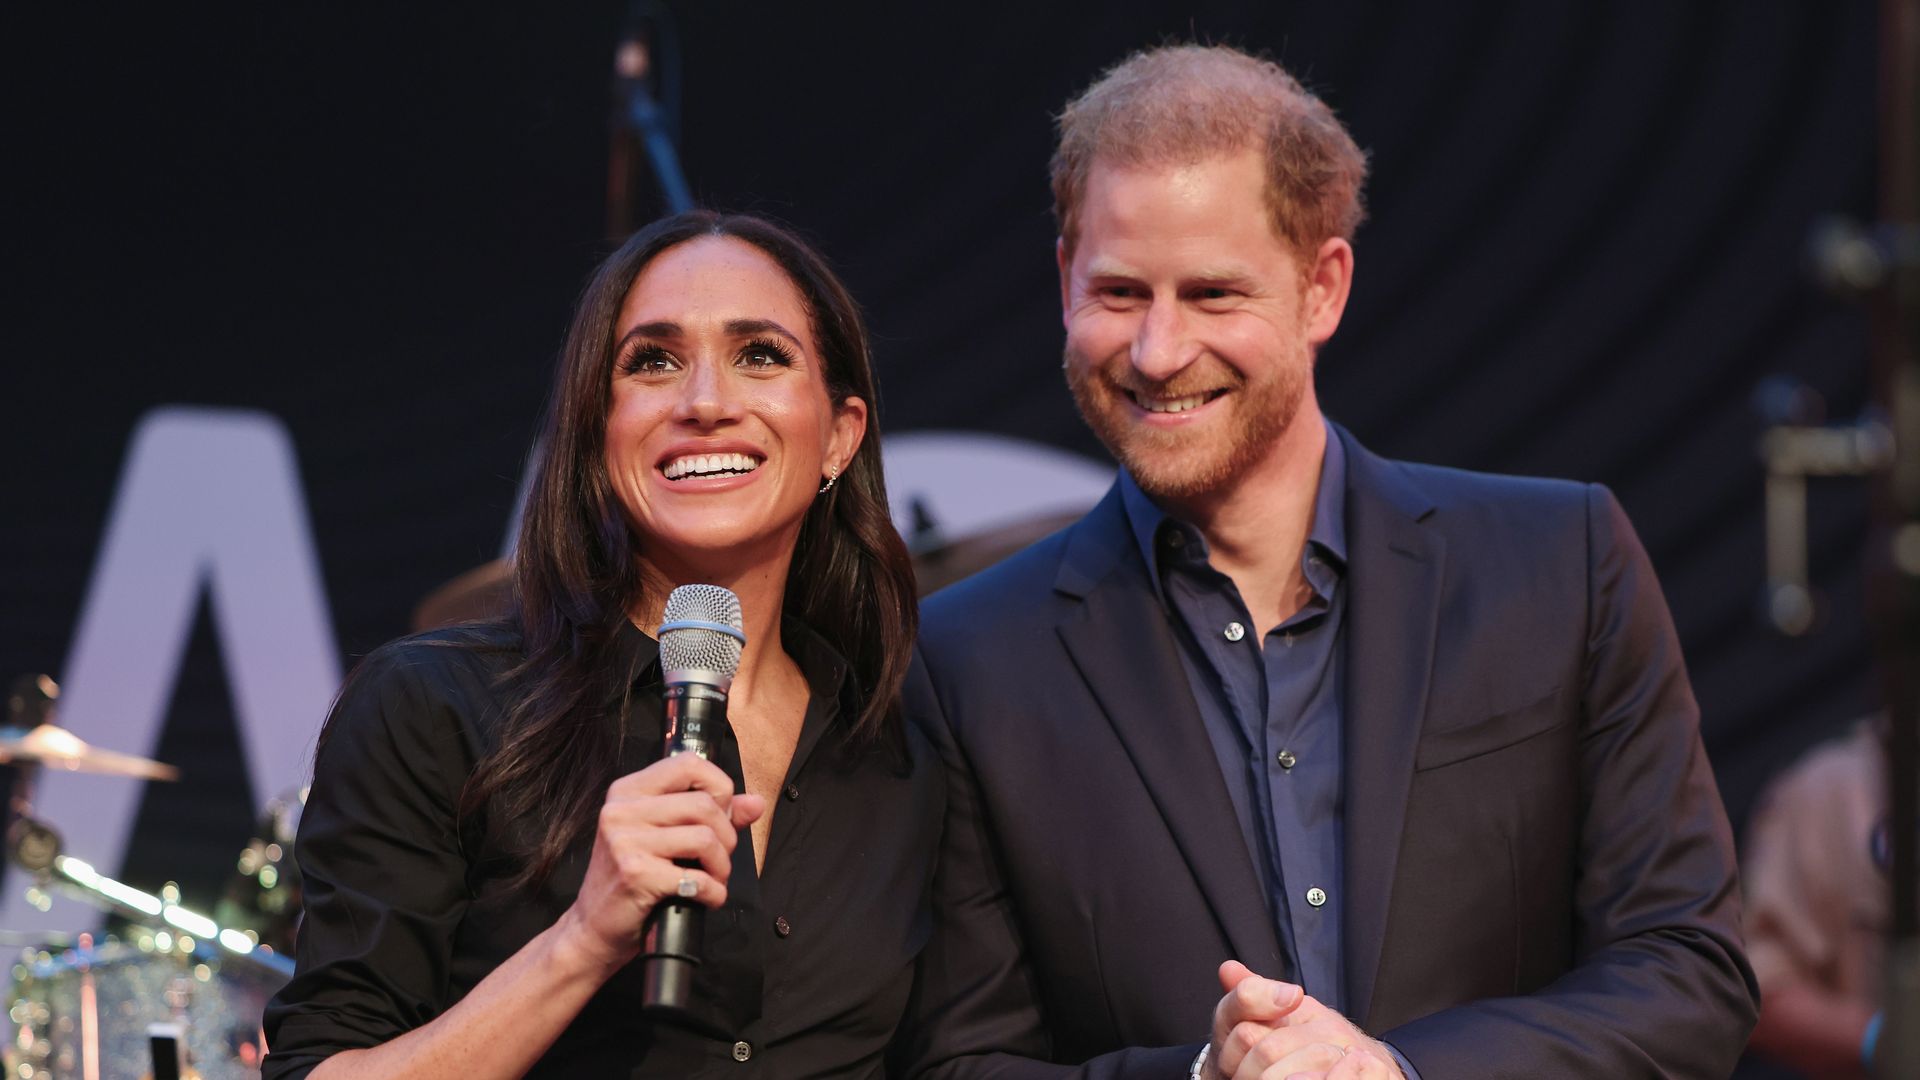 Photo of Prince Harry and Meghan Markle taken after leaving royal roles acquired by National Portrait Gallery